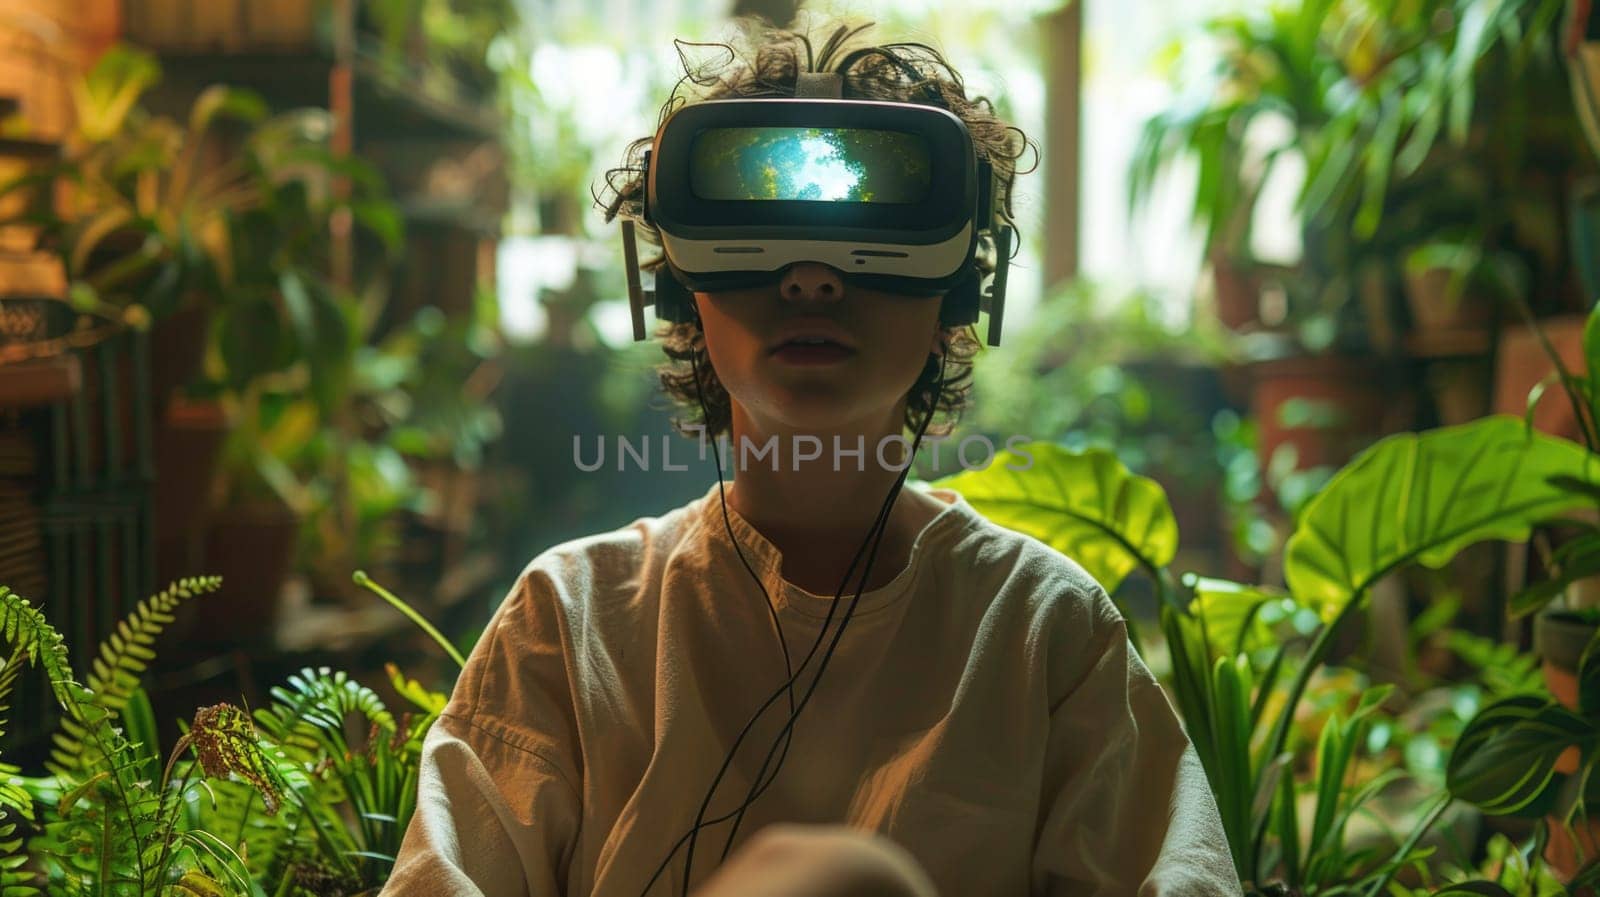 A woman immersing herself in virtual reality while being surrounded by a variety of plants in a room.